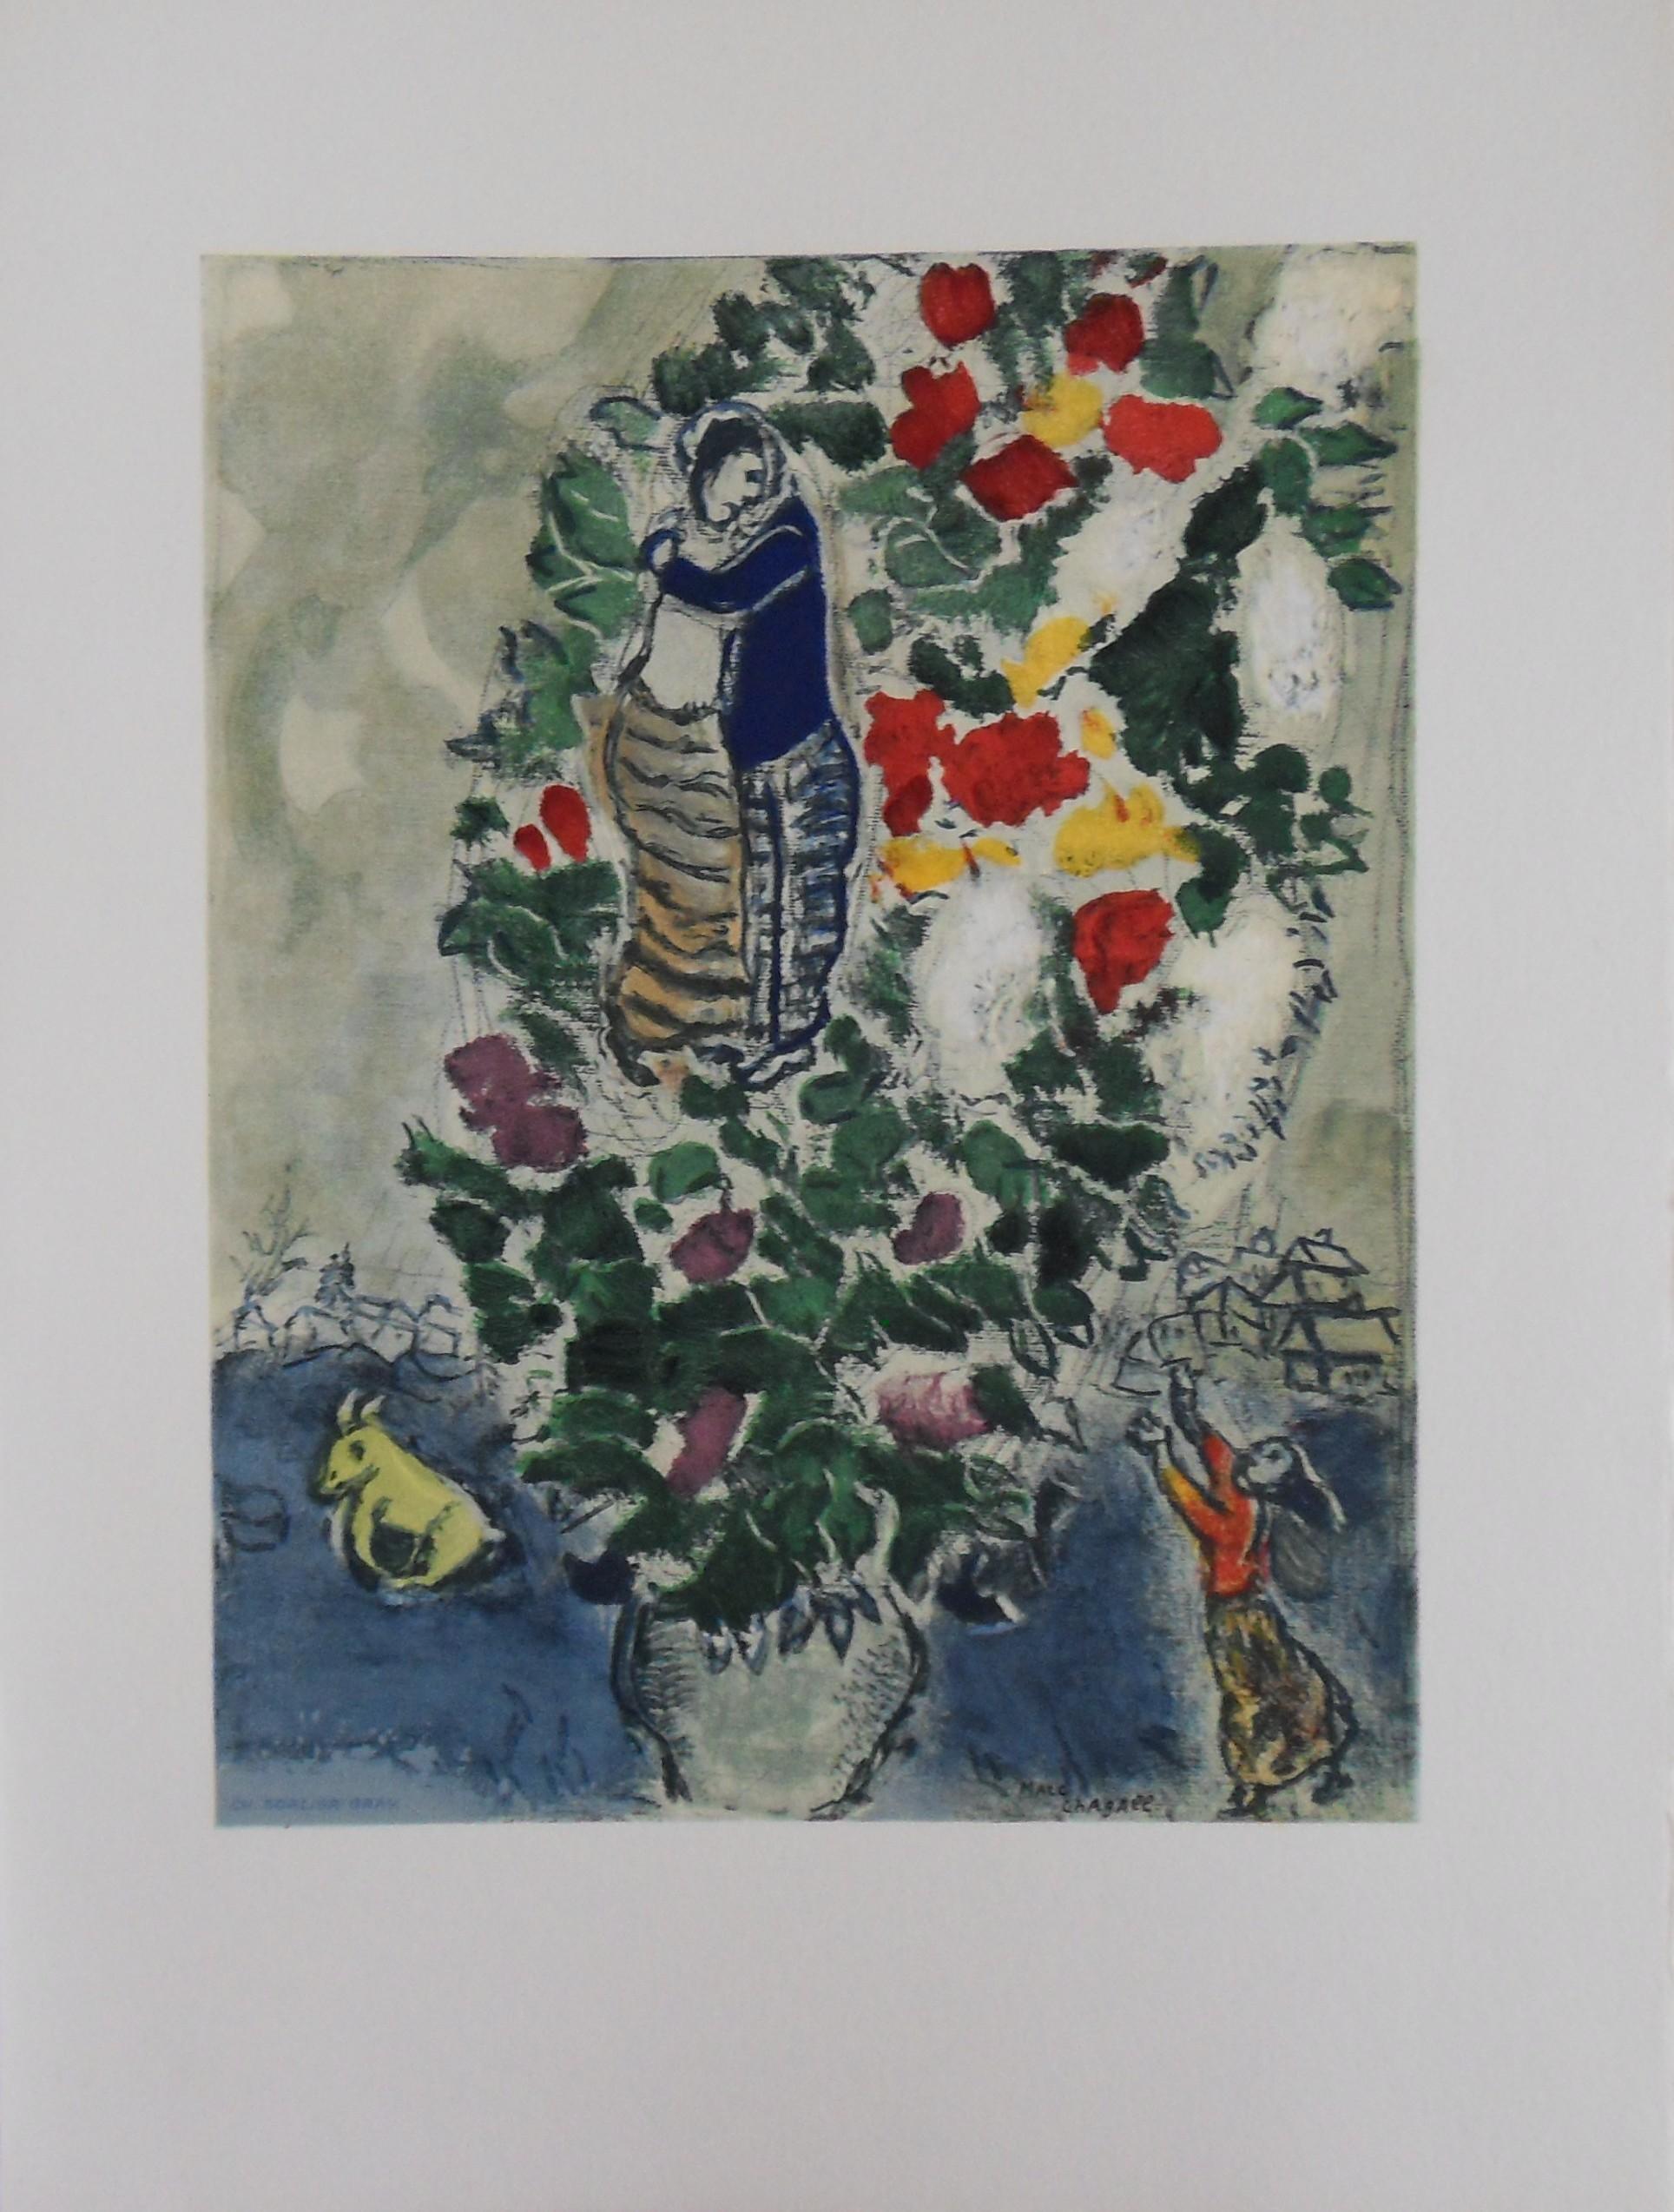 Marc Chagall Figurative Print - Lovers with Bouquet of Flowers - Original lithograph - 1965